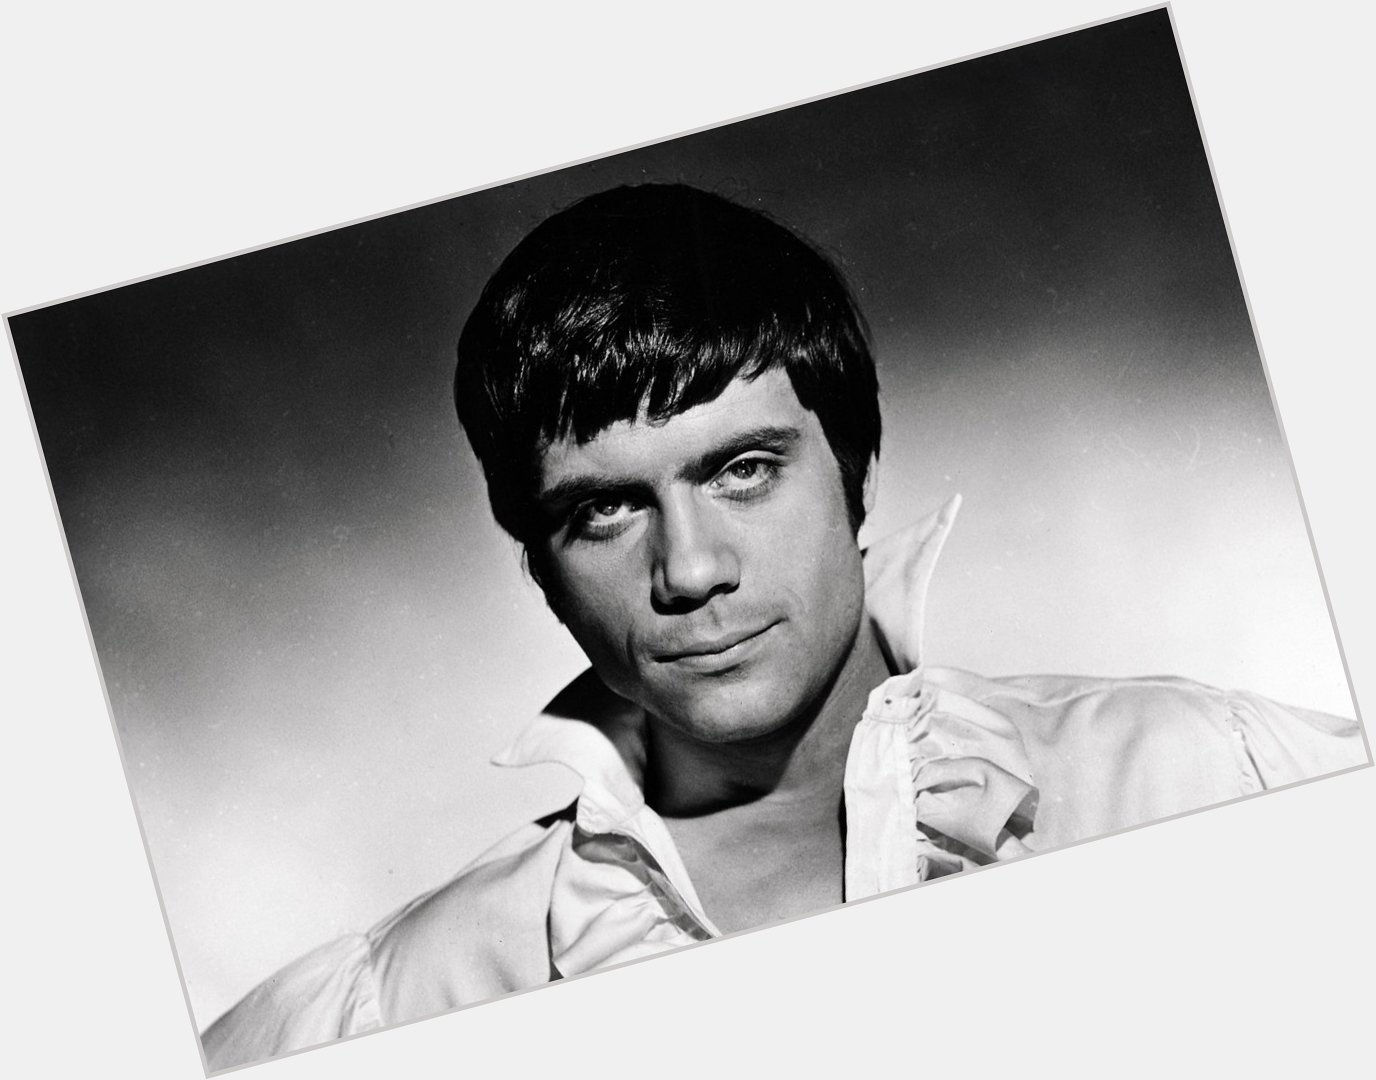 Happy birthday to Oliver Reed, one of the sexiest movie stars ever. 